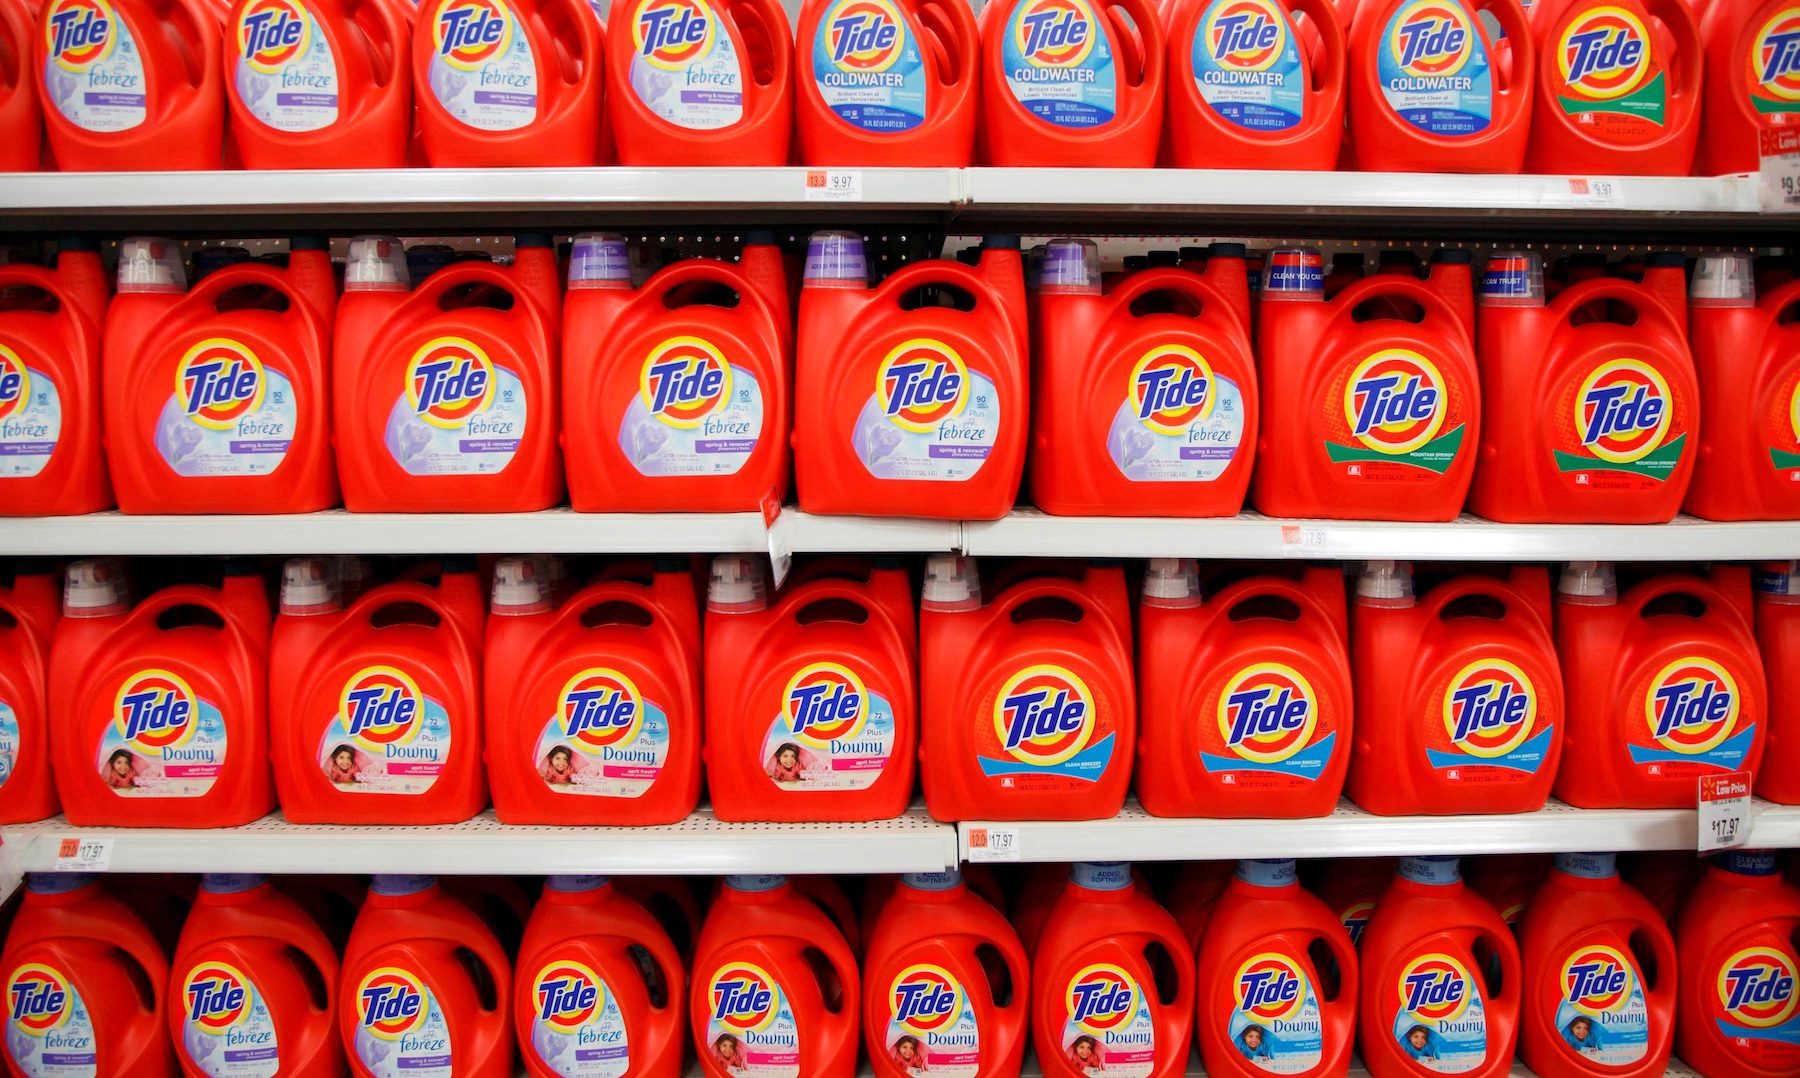 Tide maker P&G dialing up discounts as US consumers pull back